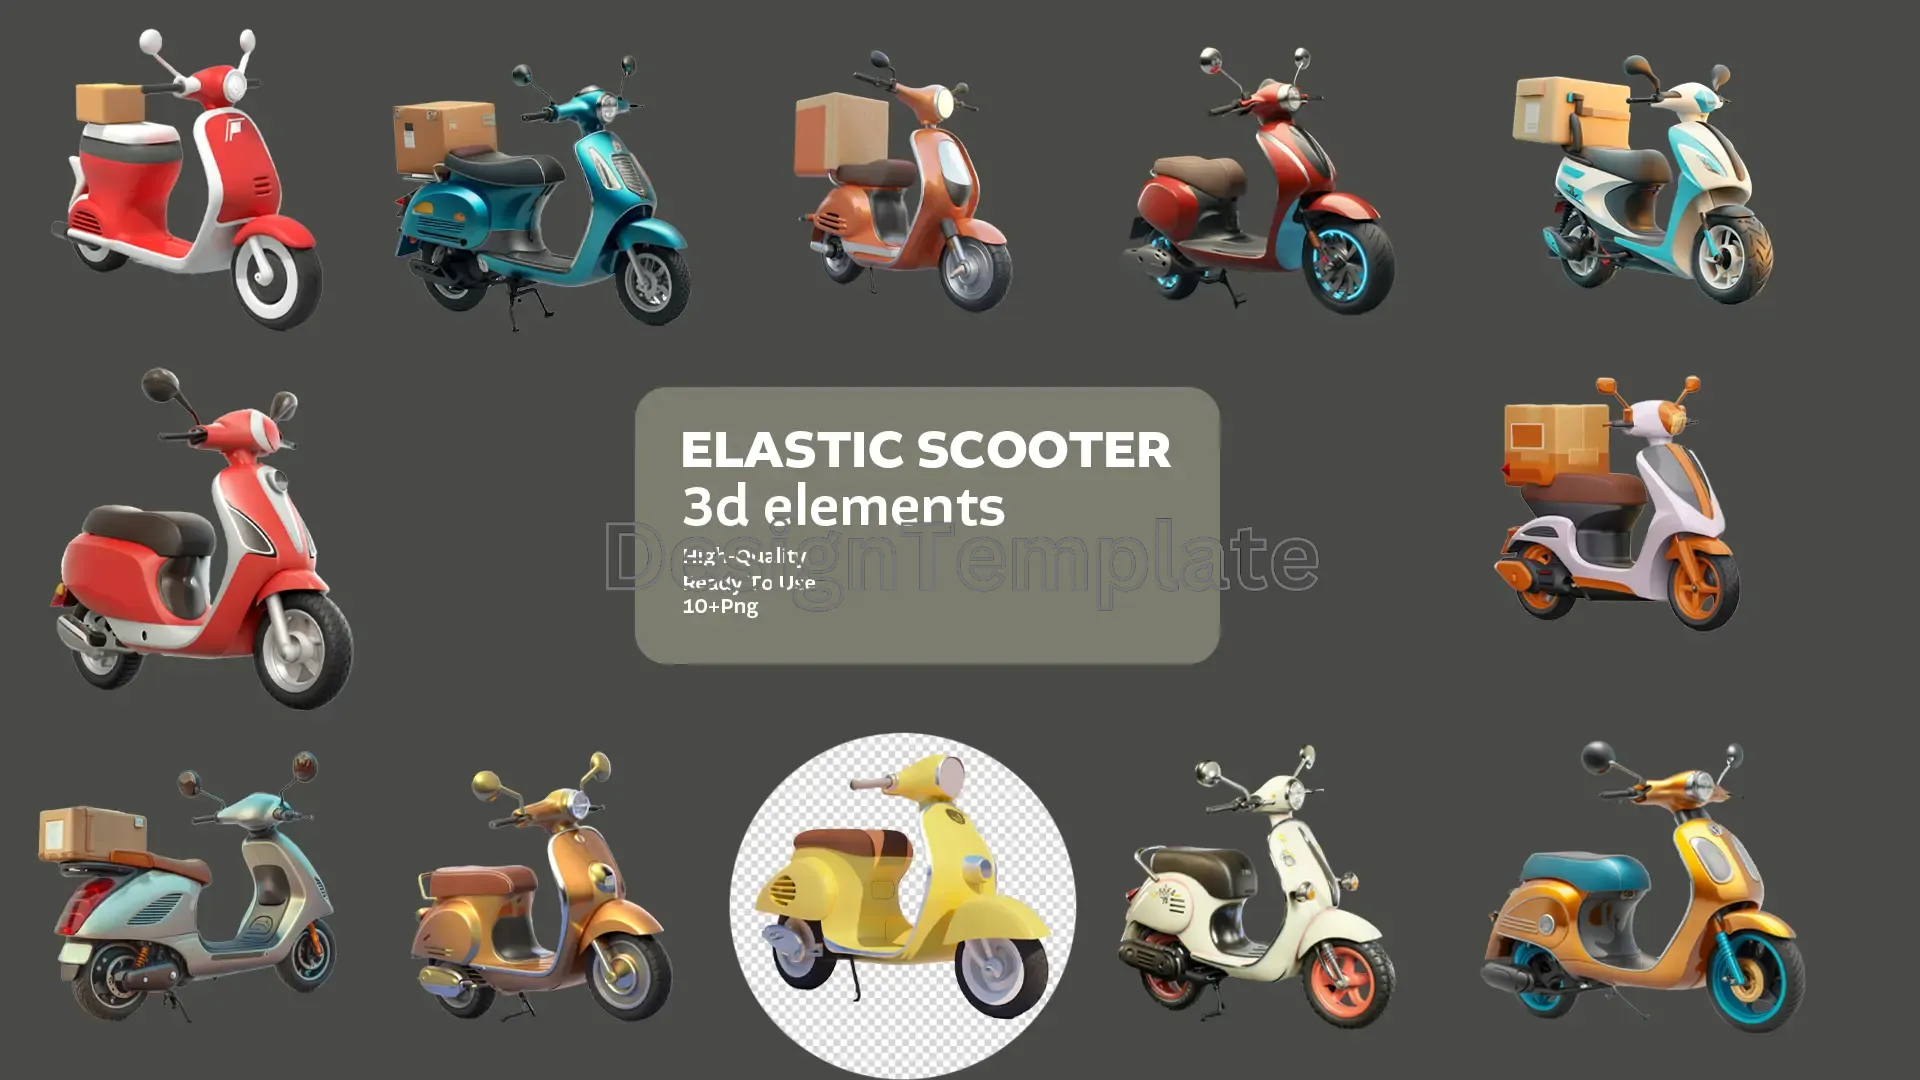 Urban Glide Elastic Scooter 3D Elements Pack image